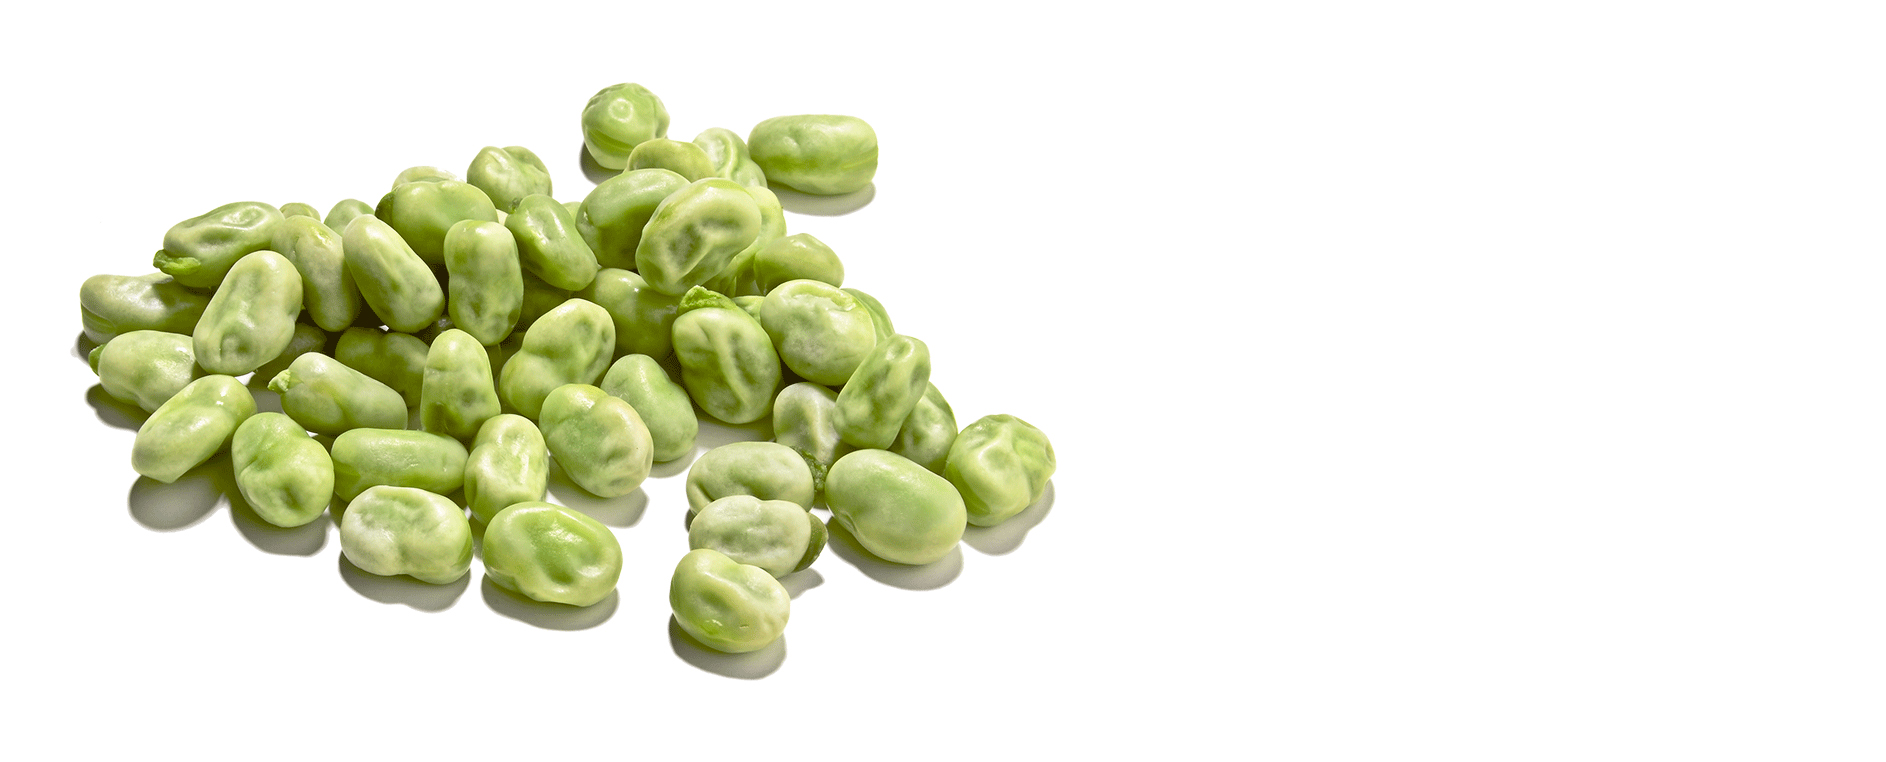 IQF broad beans image